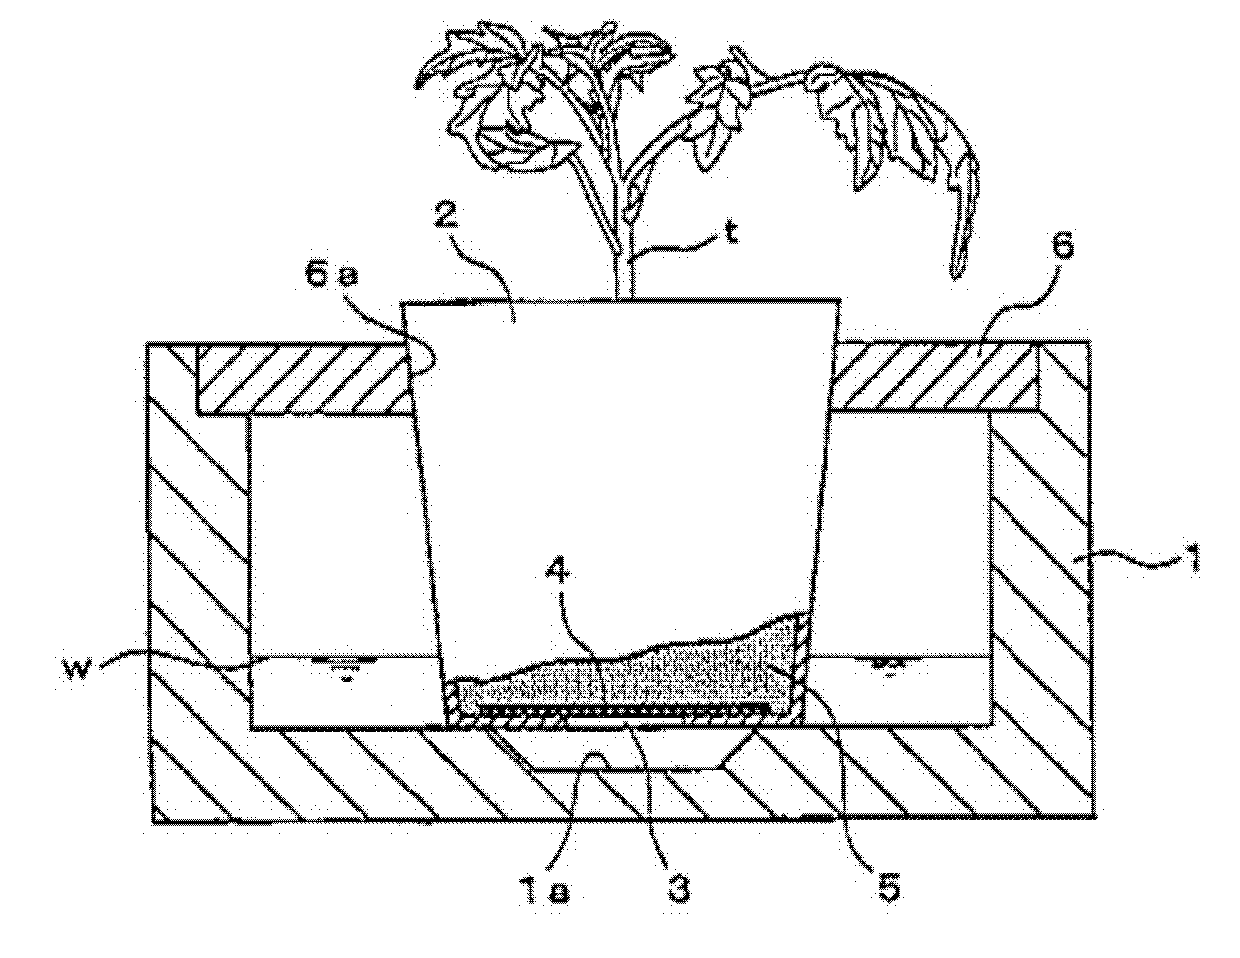 Nutrient solution culture system and using the method of nutrient solution cultivation, and nutrient solution culture with basin